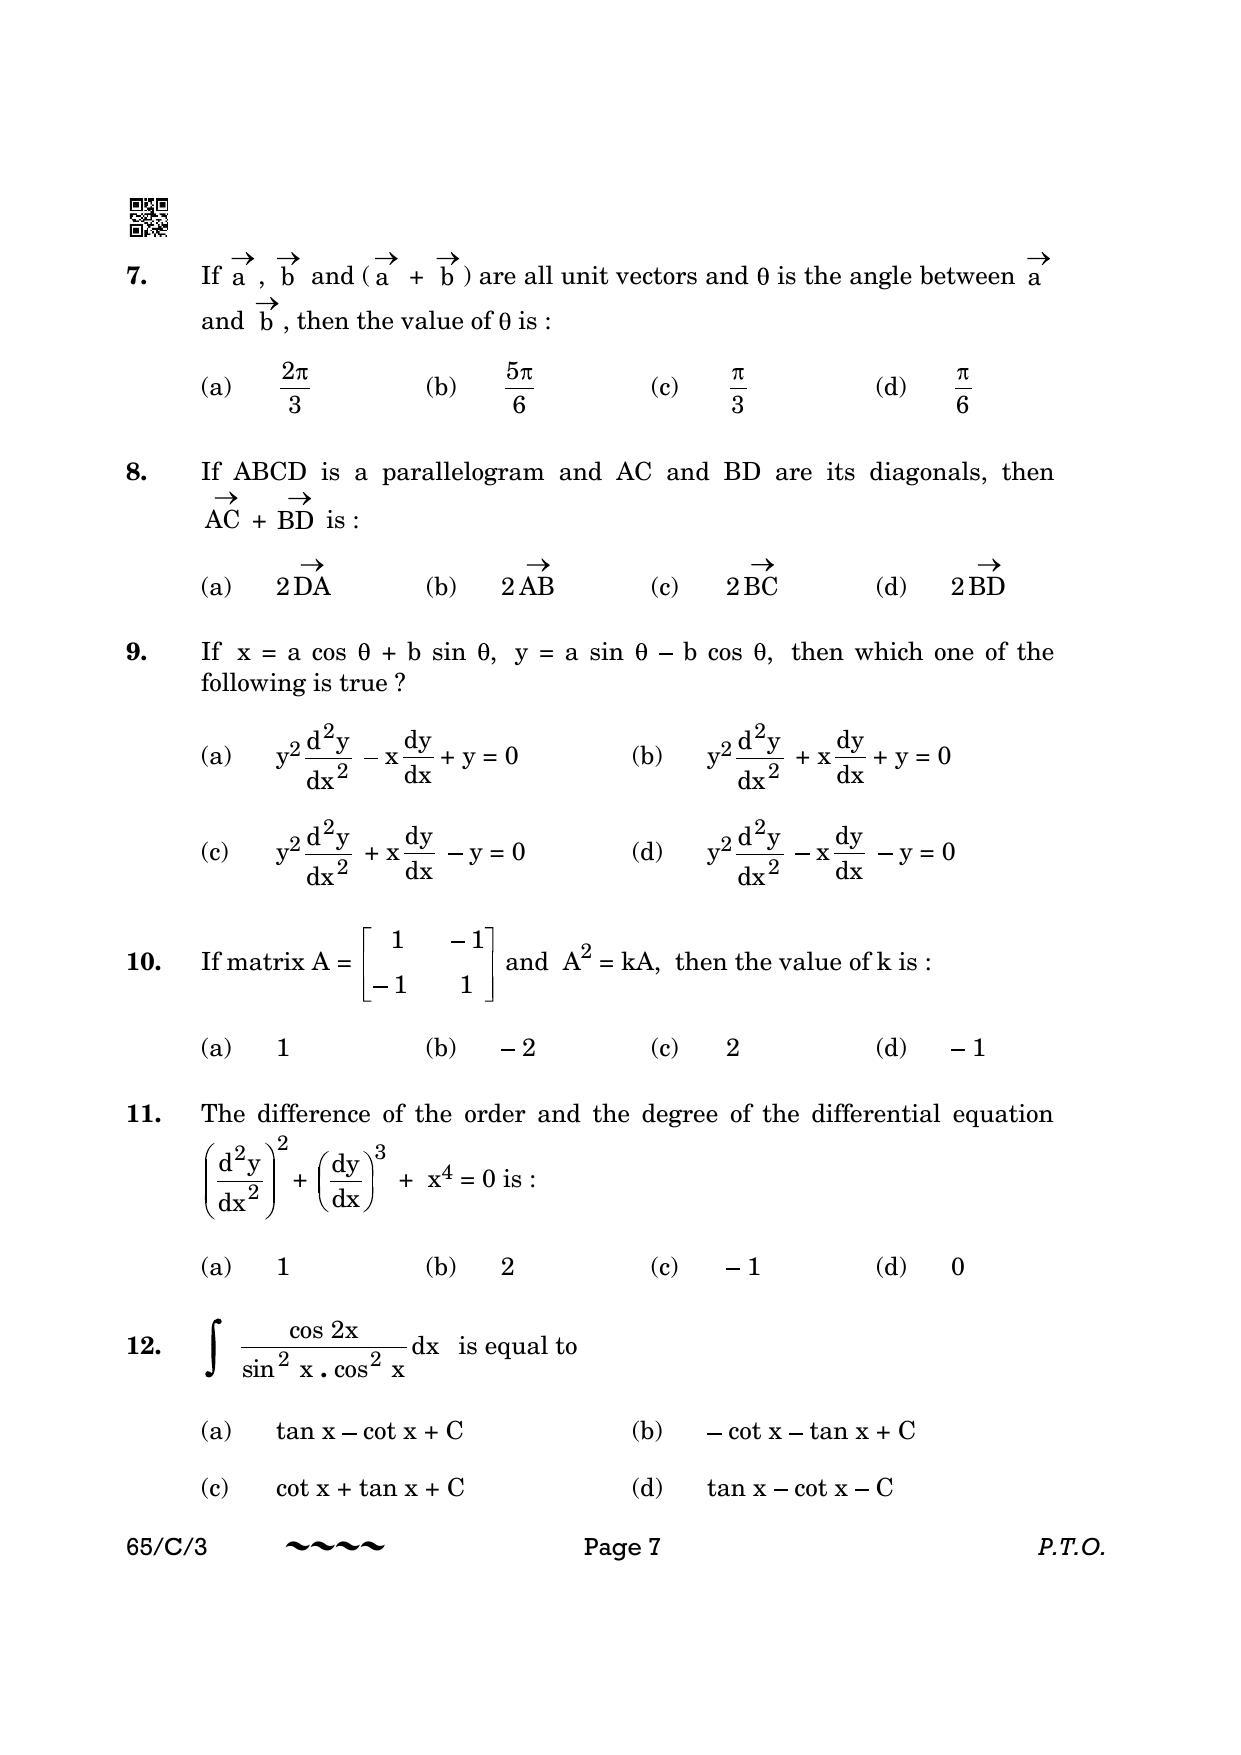 CBSE Class 12 65-3- Mathematics 2023 (Compartment) Question Paper - Page 7